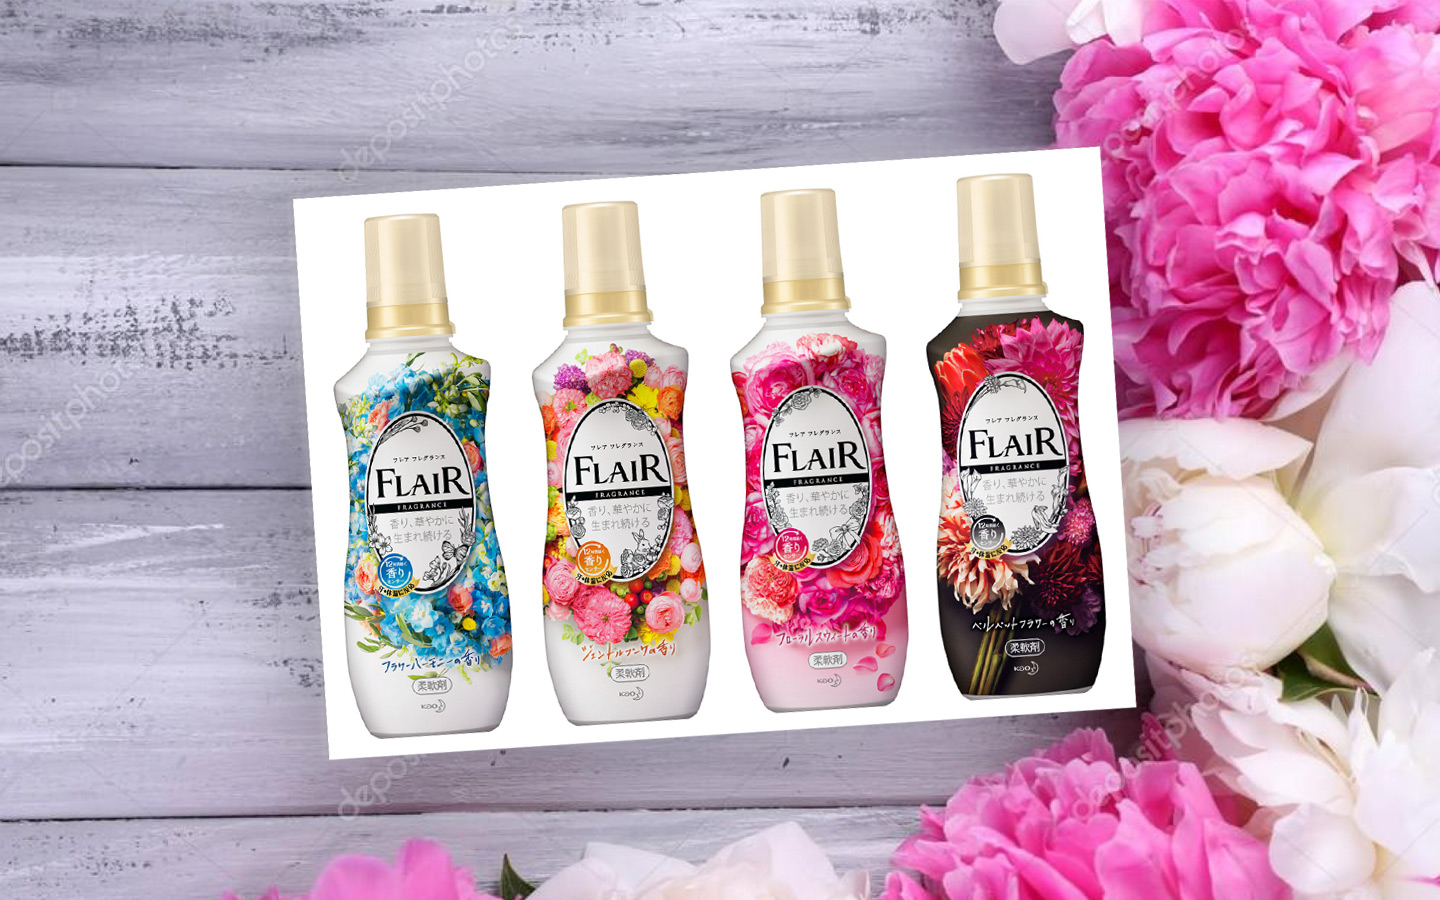 KAO "Flair Fragrance" fabric softener with antibacterial effec